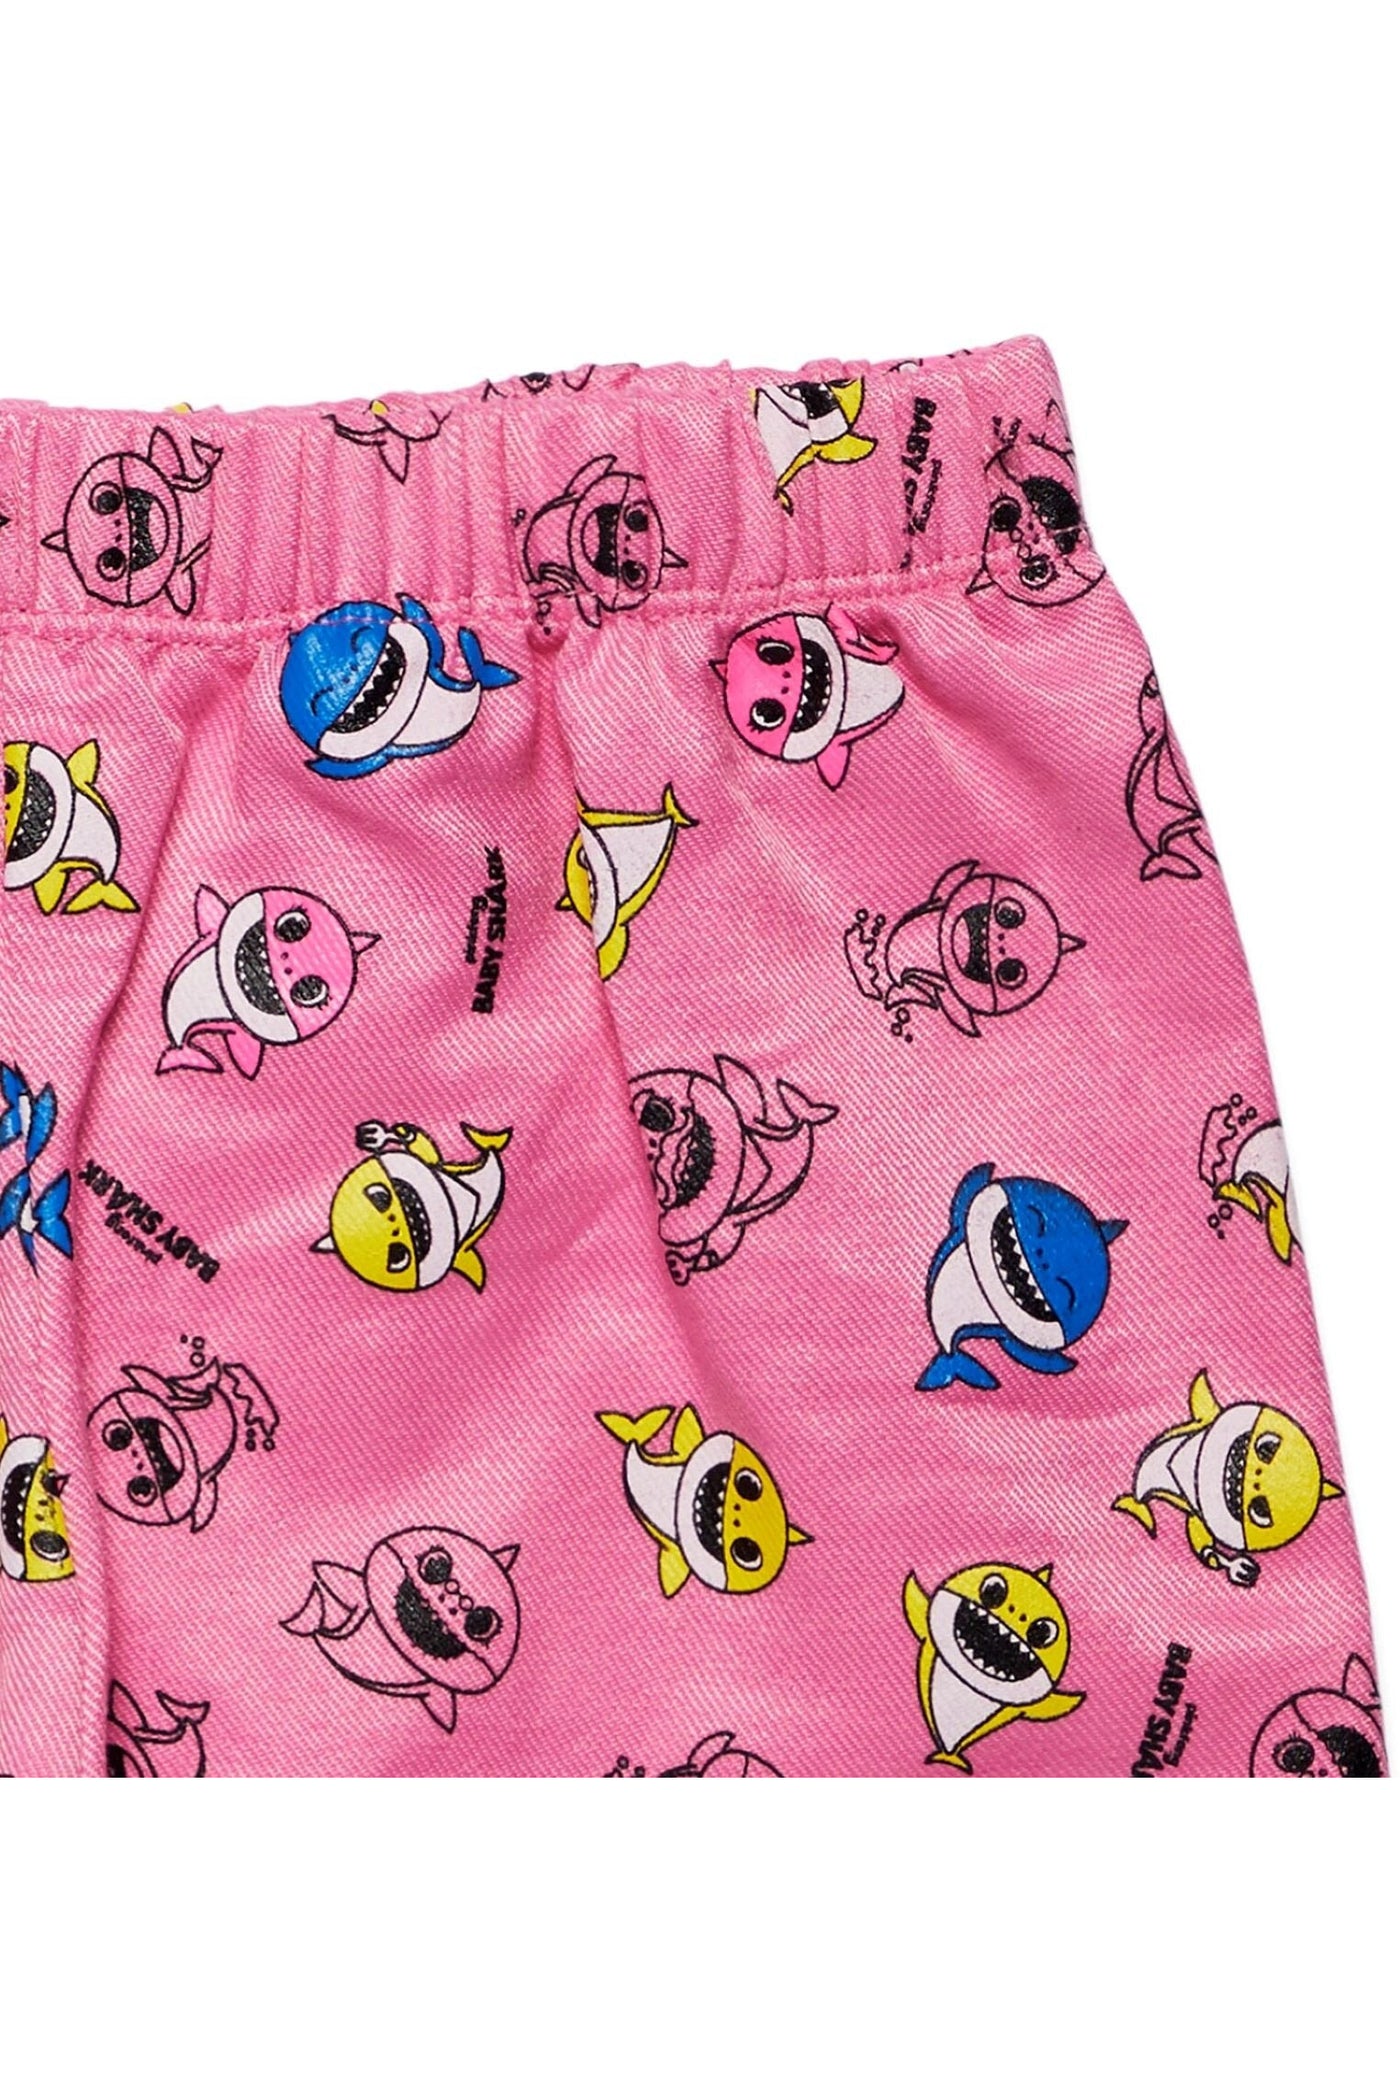 Pinkfong Baby Shark Graphic T-Shirt Bike Shorts and Outfit Set